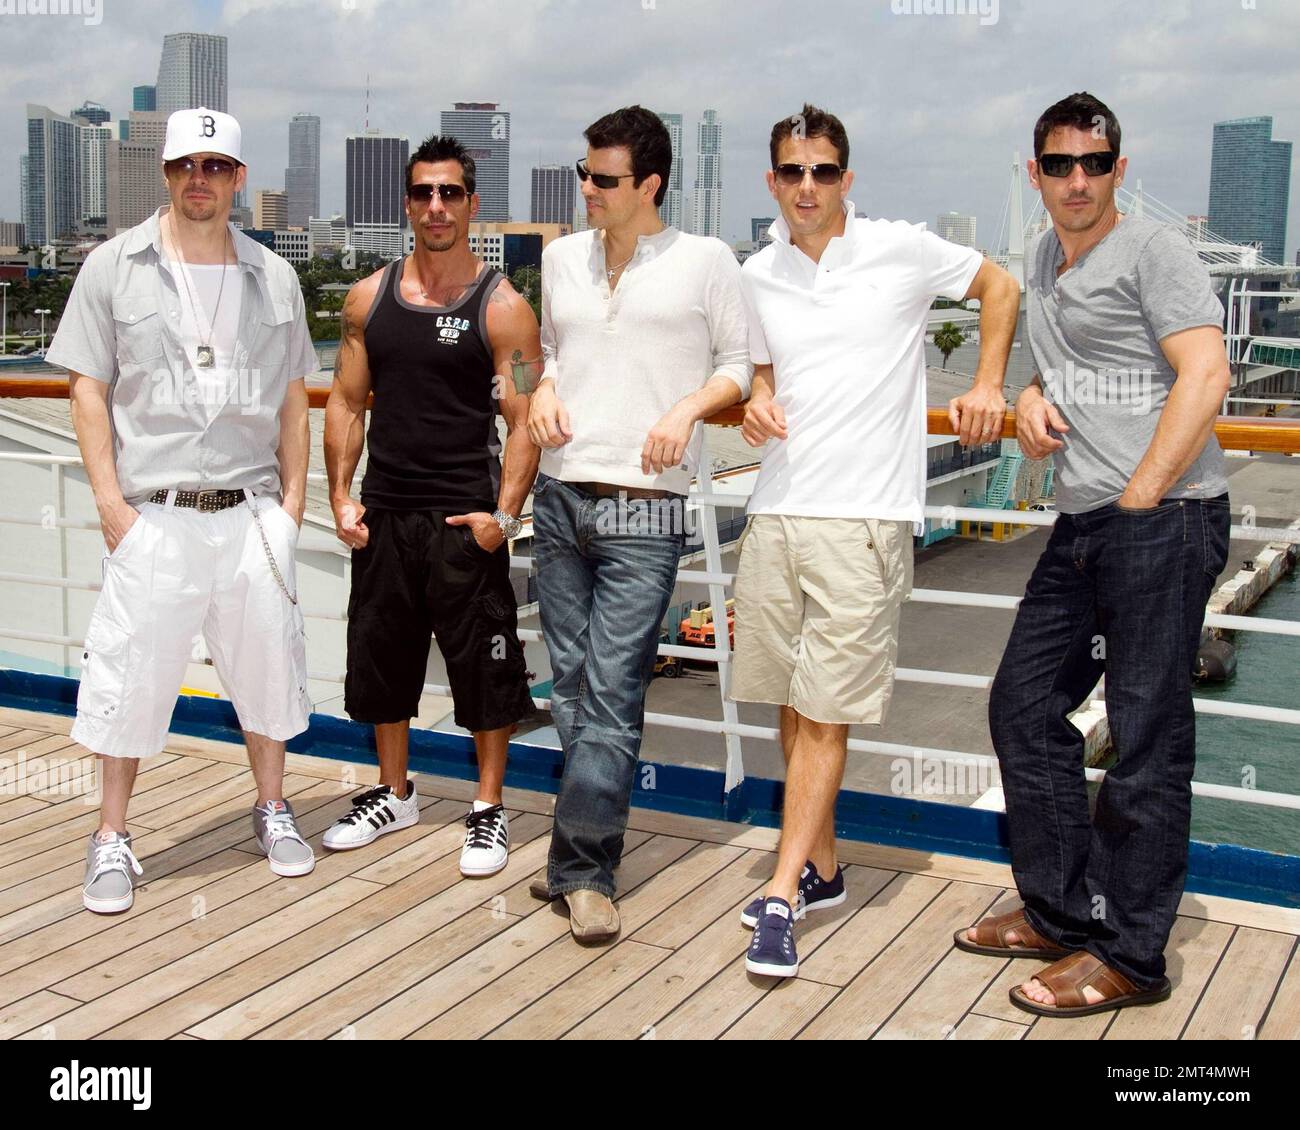 39 The New Kids On The Block Set Sail On The High Seas Fo Their Third Nkotb  Cruise Photos & High Res Pictures - Getty Images